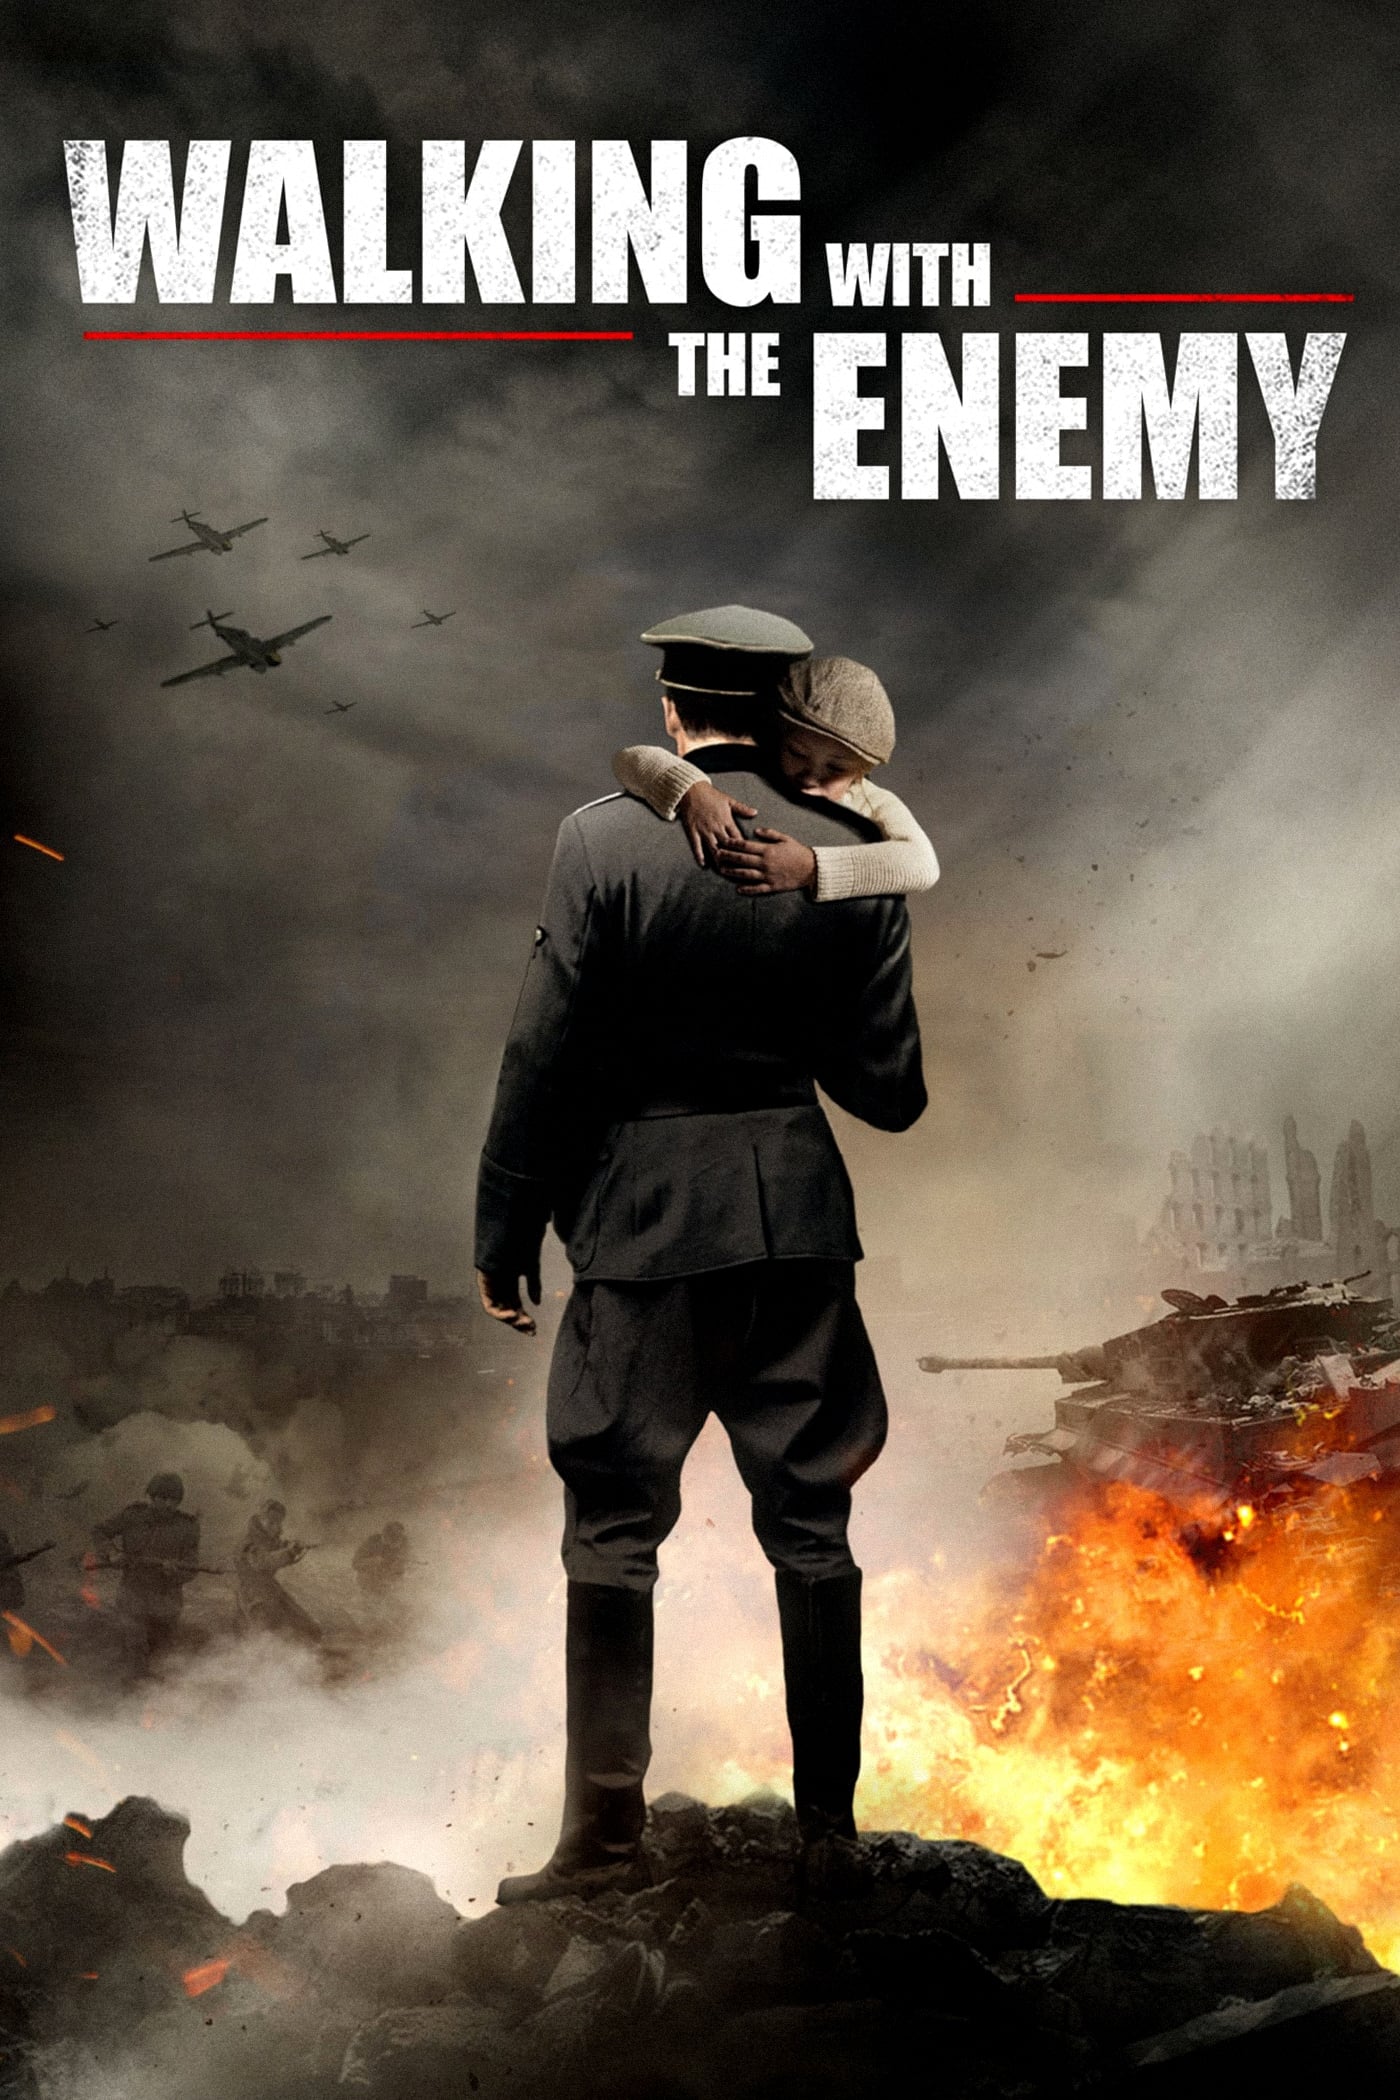 Walking with the Enemy (2014)